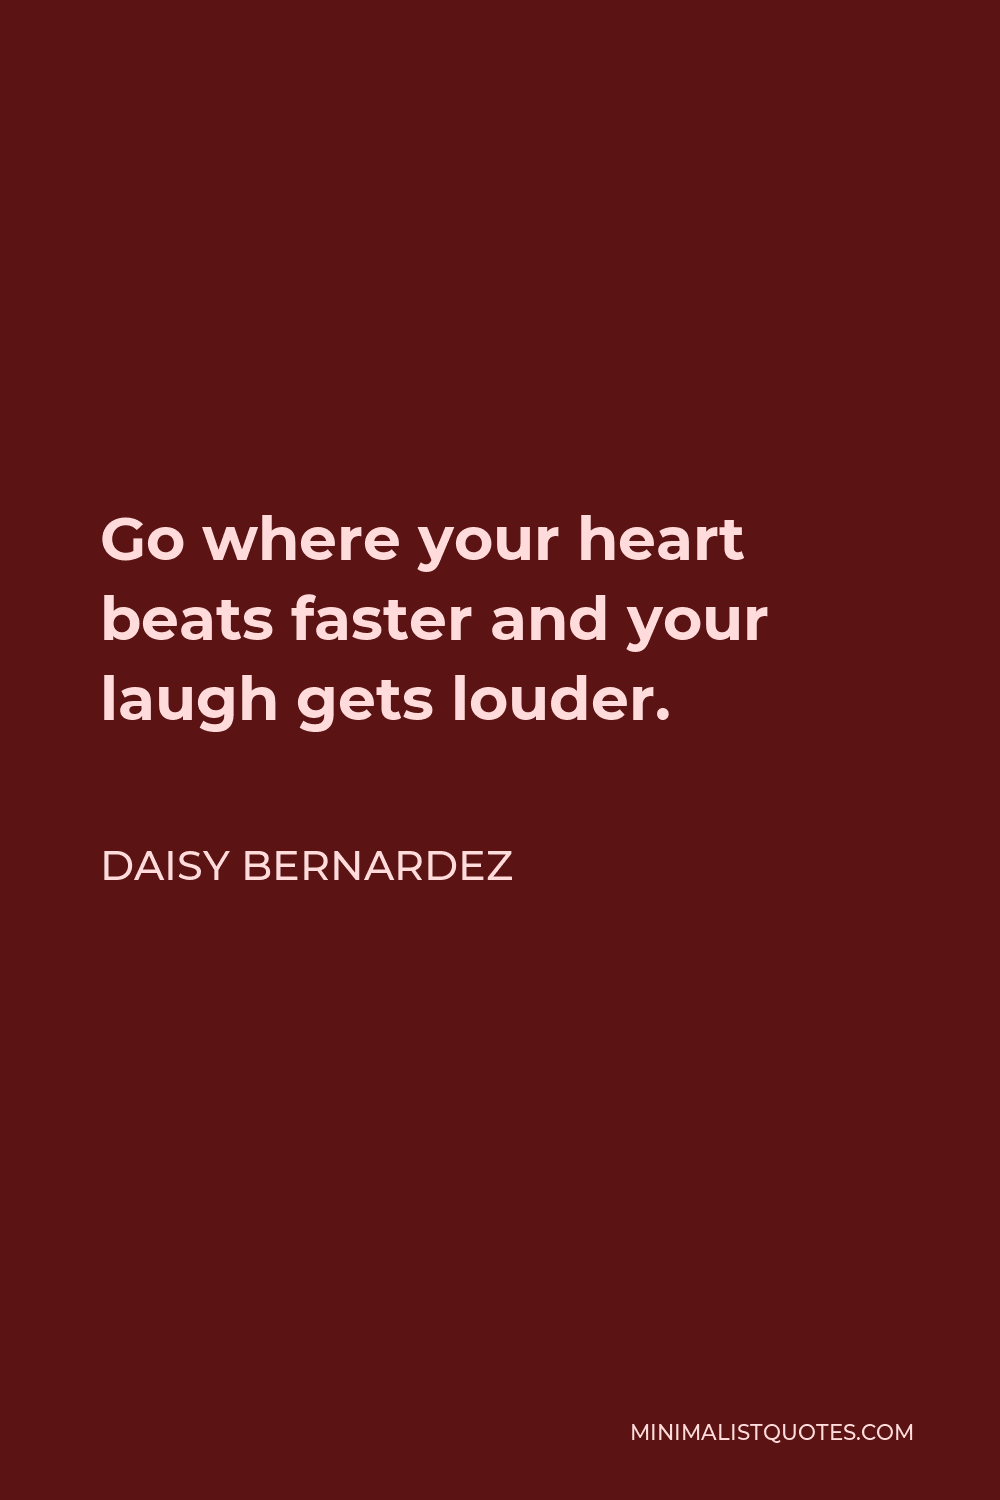 Daisy Bernardez Quote - Go where your heart beats faster and your laugh gets louder.